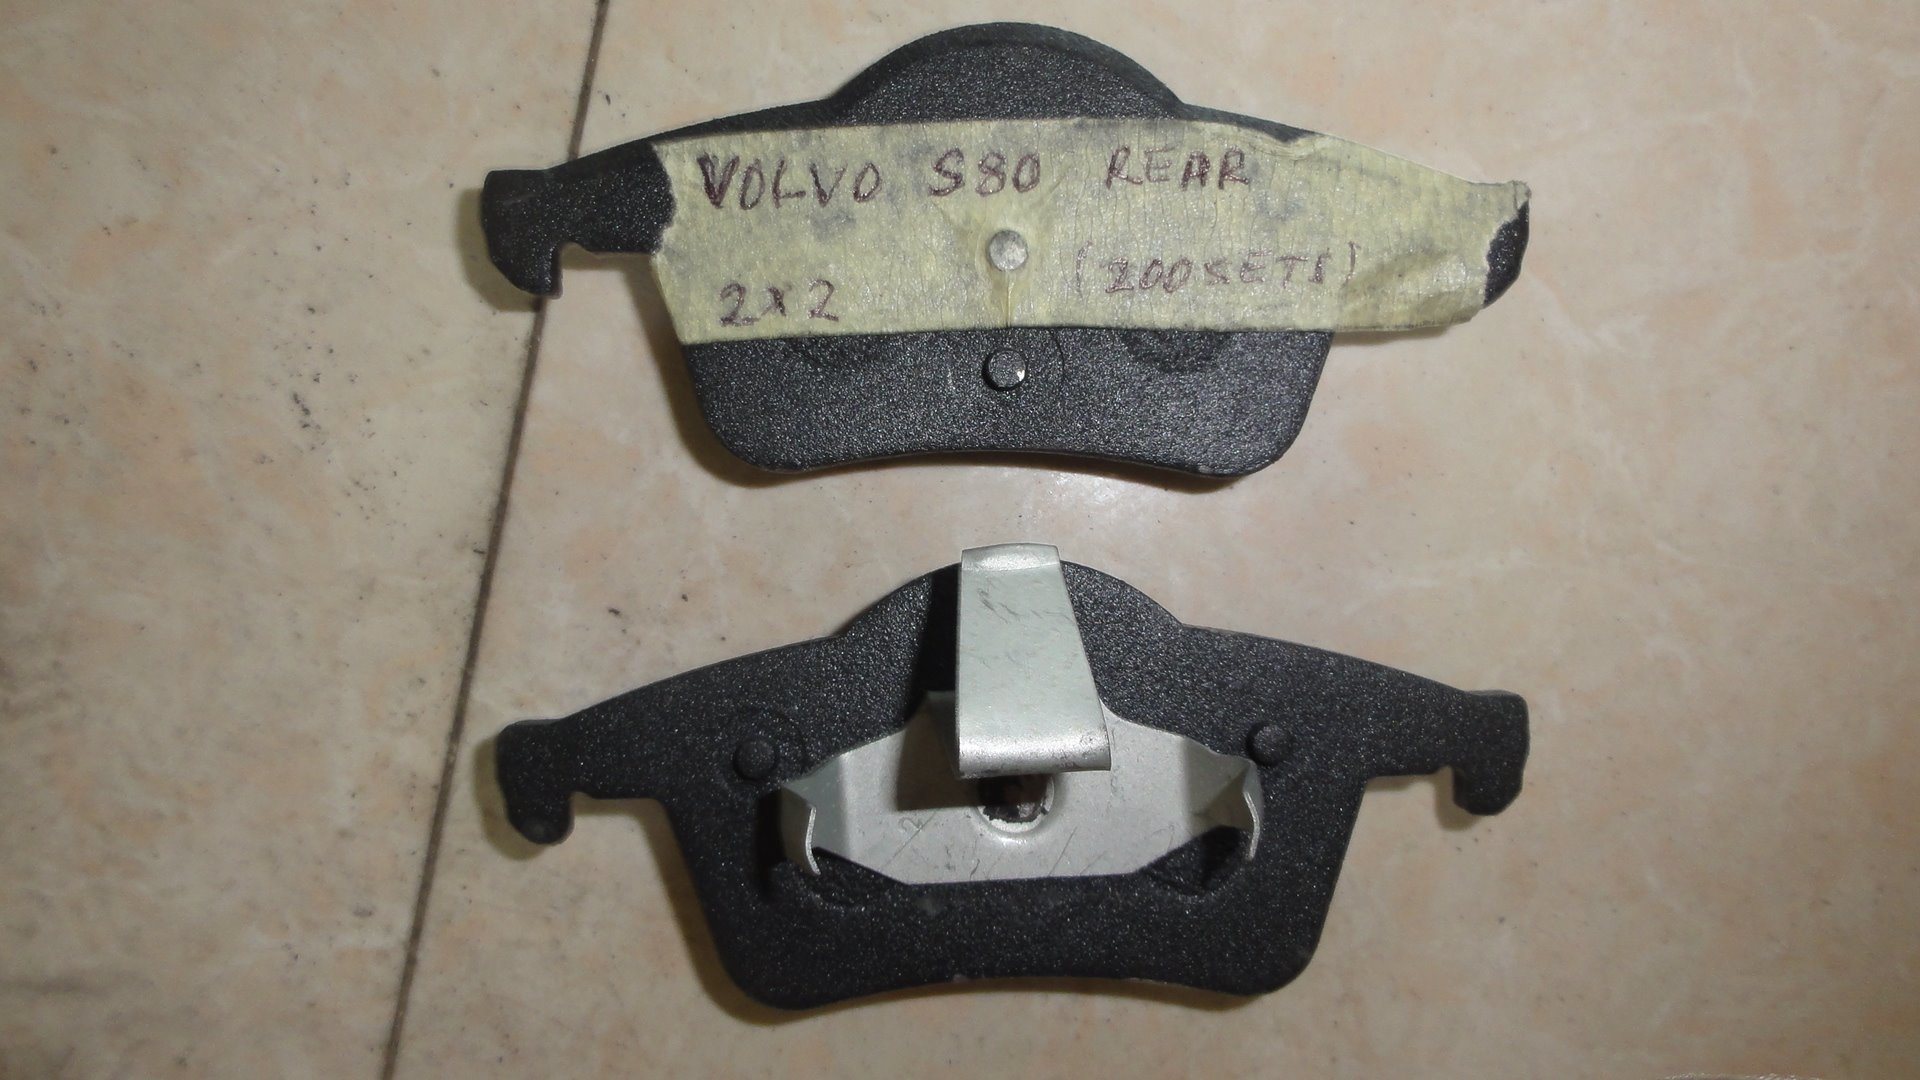 Car Auto Part Disc Brake Pad for Volvo S80 Rear